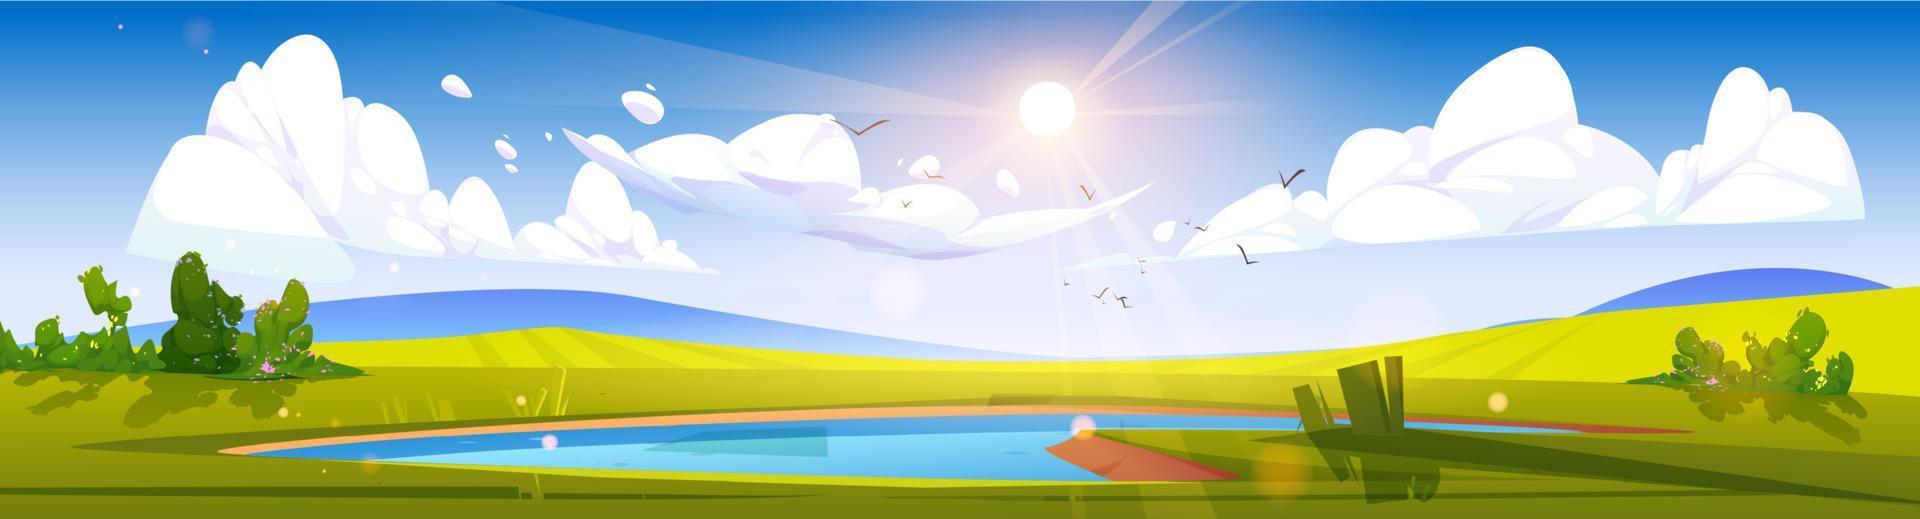 Cartoon nature landscape day time background vector